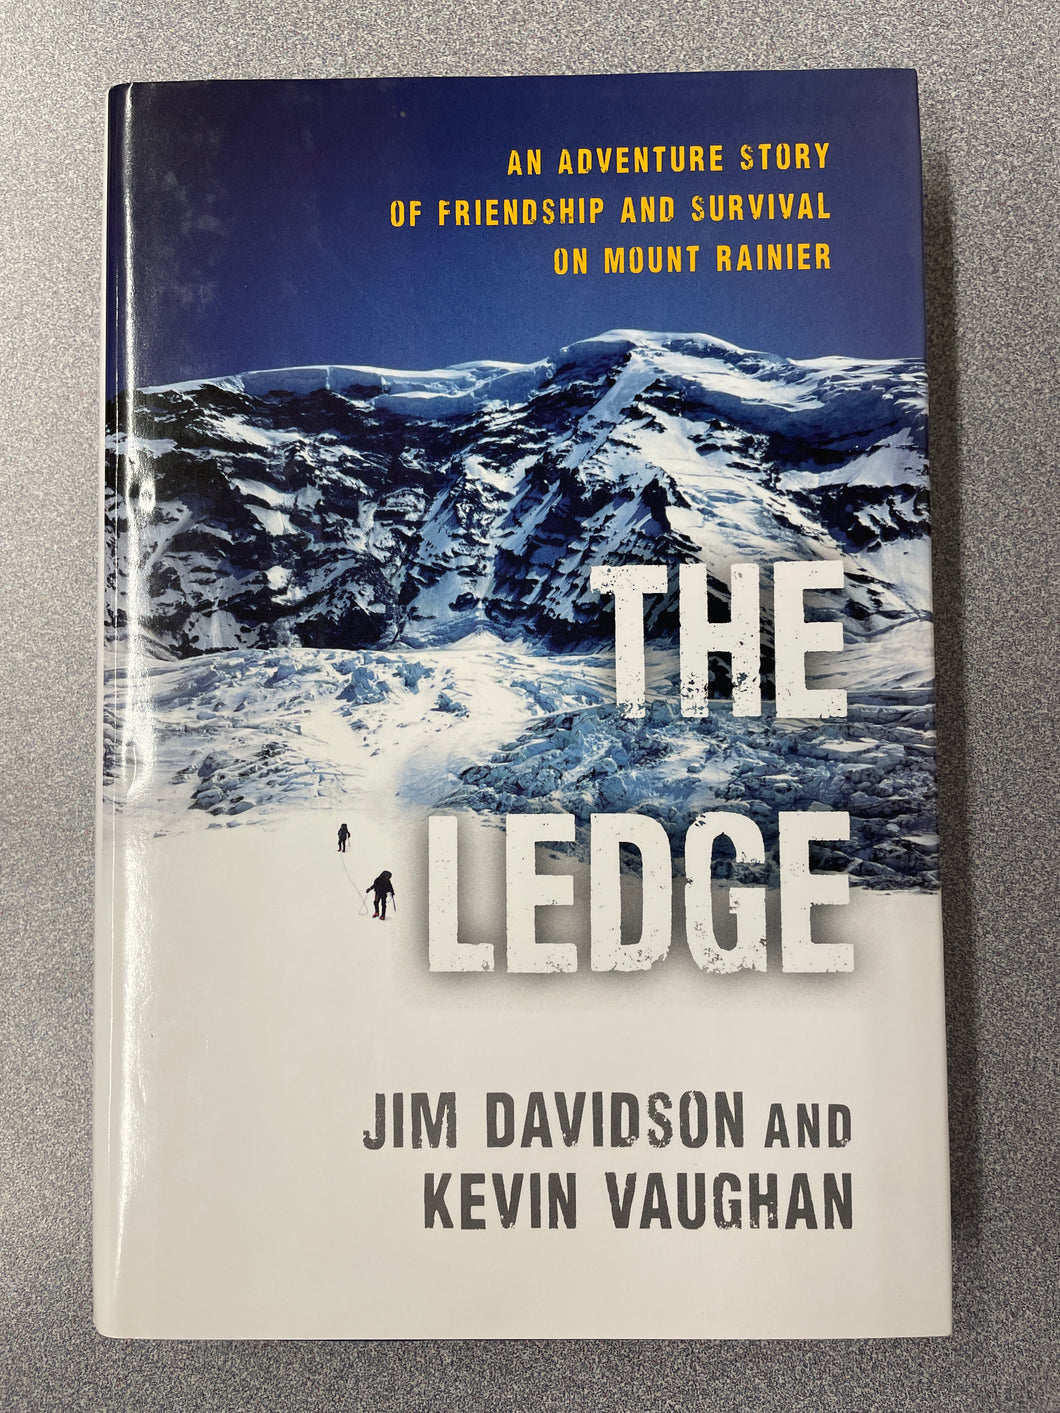 The Ledge: An Adventure Story of Friendship and Survival on Mount Rainier, Davidson, Jim and Kevin Vaughan  [2011] TS 3/24